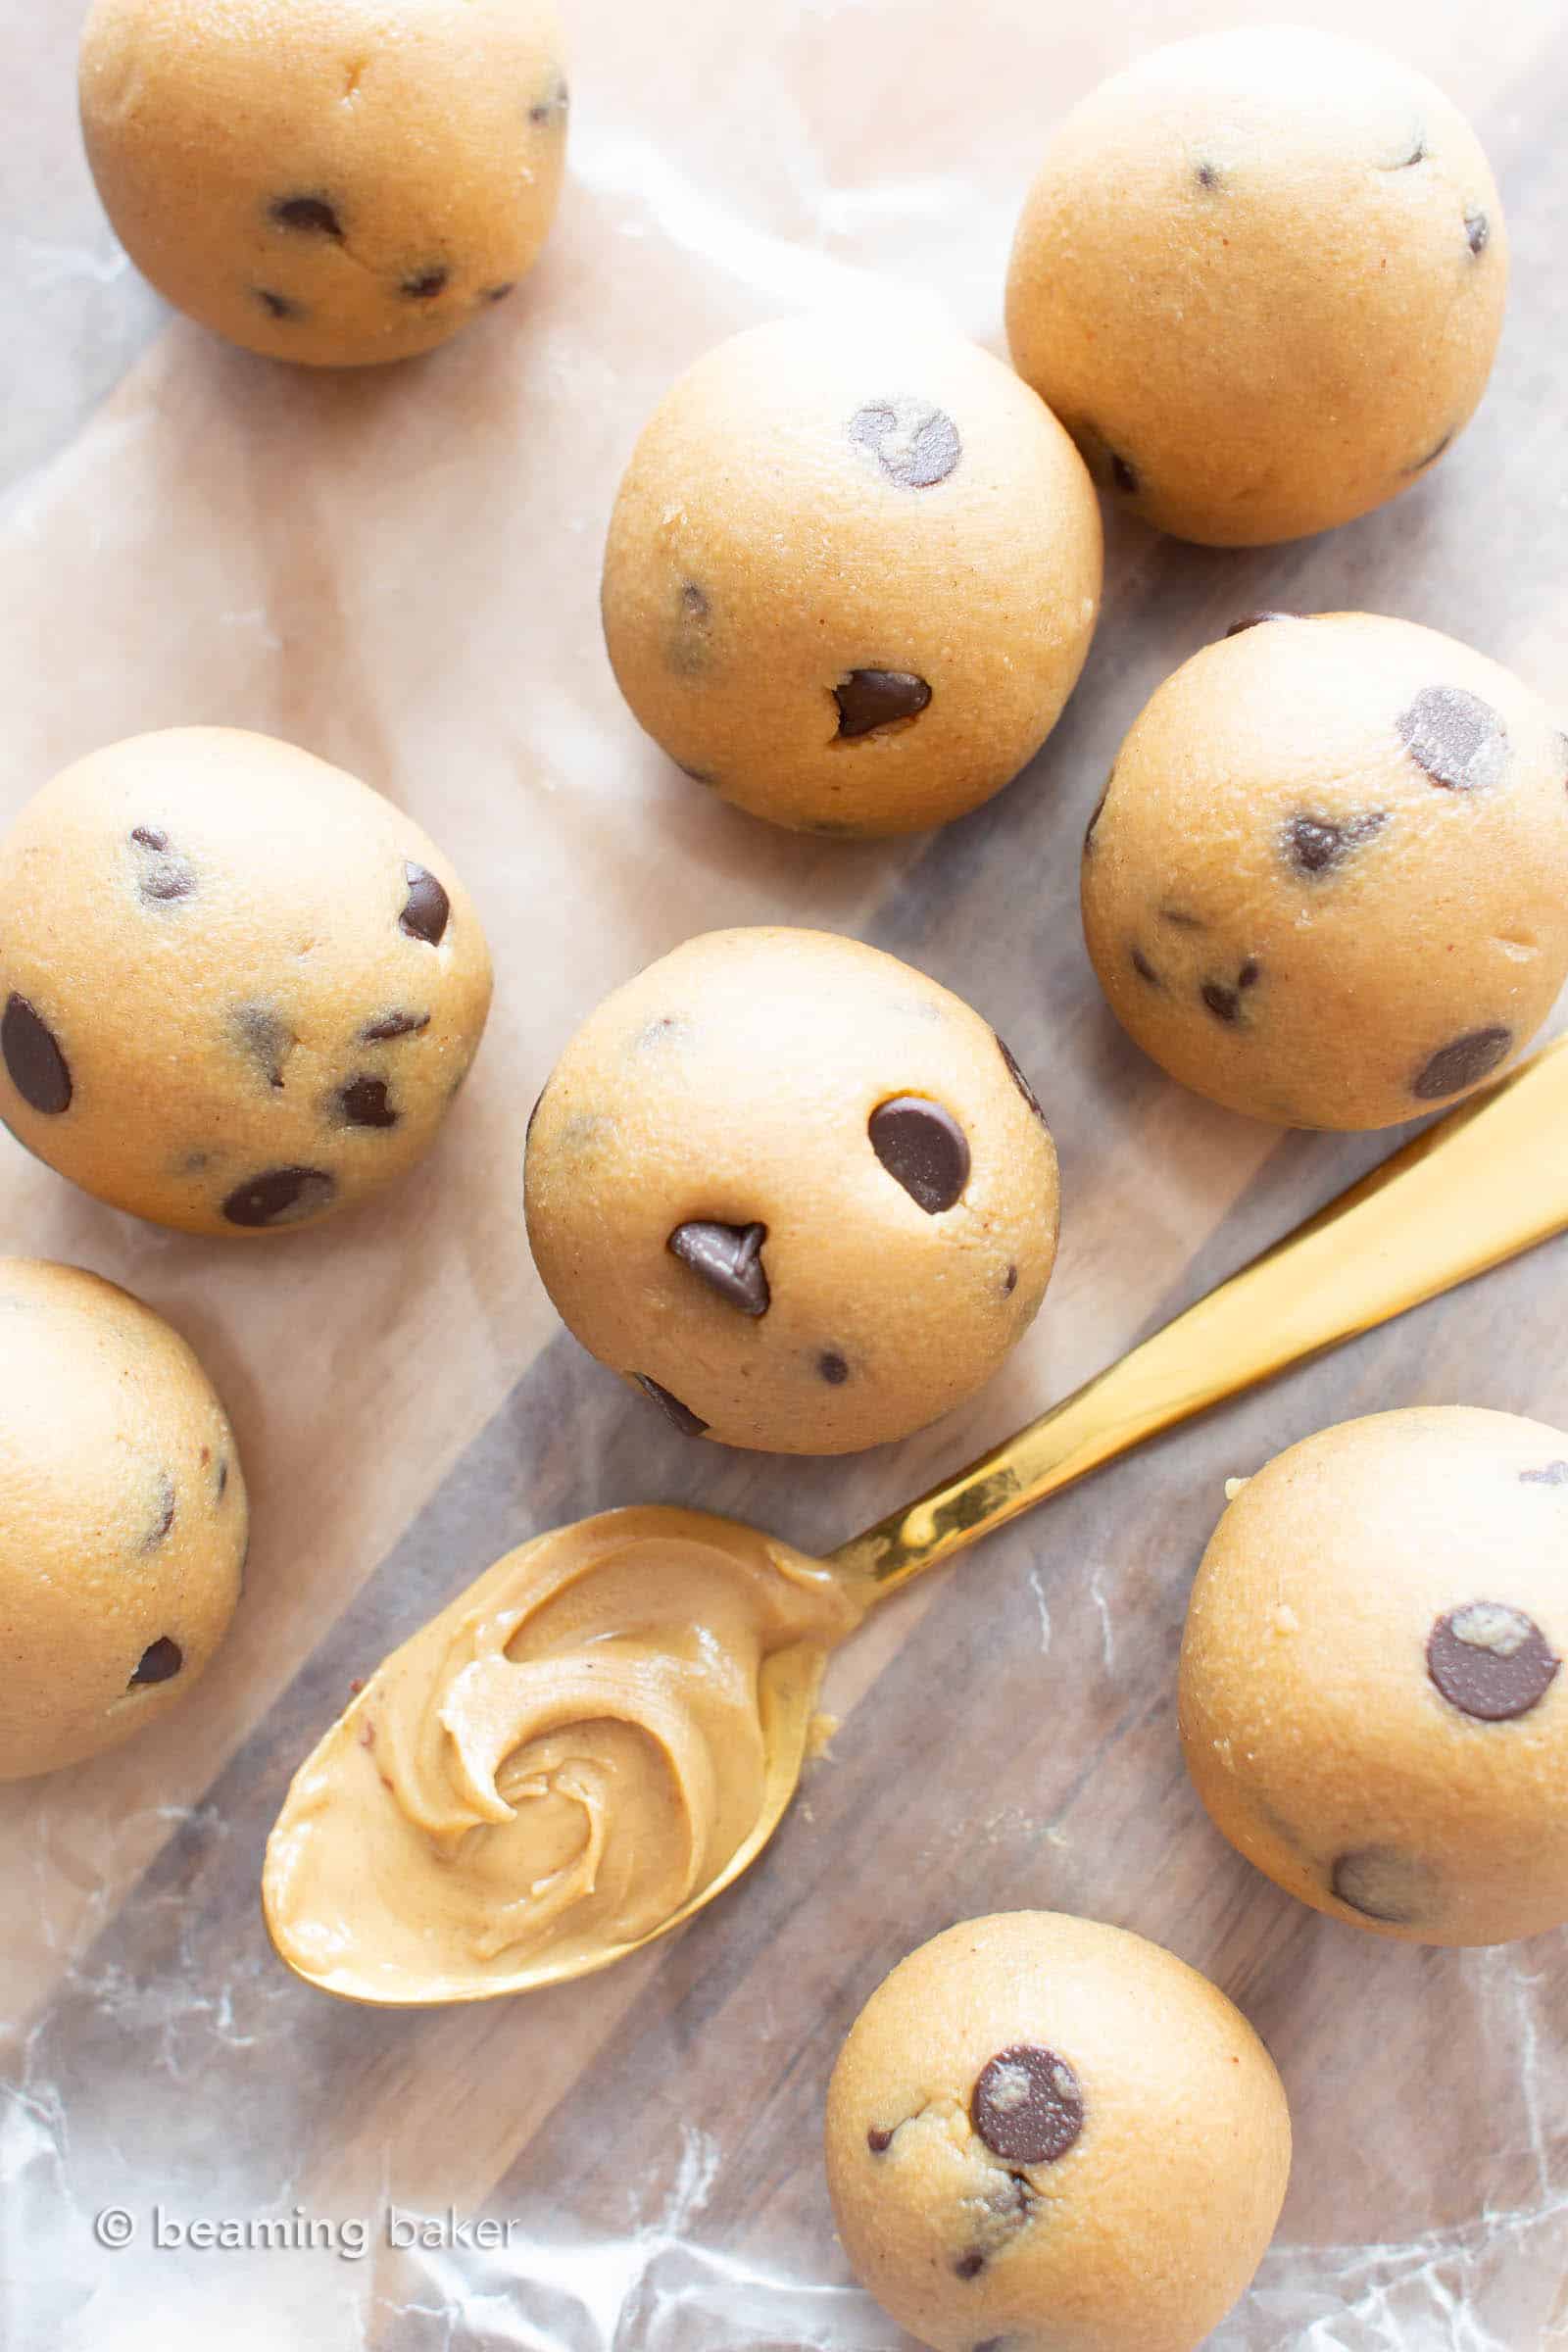 4 Ingredient Keto Peanut Butter Balls: this low carb peanut butter balls recipe is super EASY, keto-friendly and tasty! Lightly sweet peanut butter delight! Protein-Rich, Vegan. #Keto #LowCarb #PeanutButter #Vegan | Recipe at BeamingBaker.com